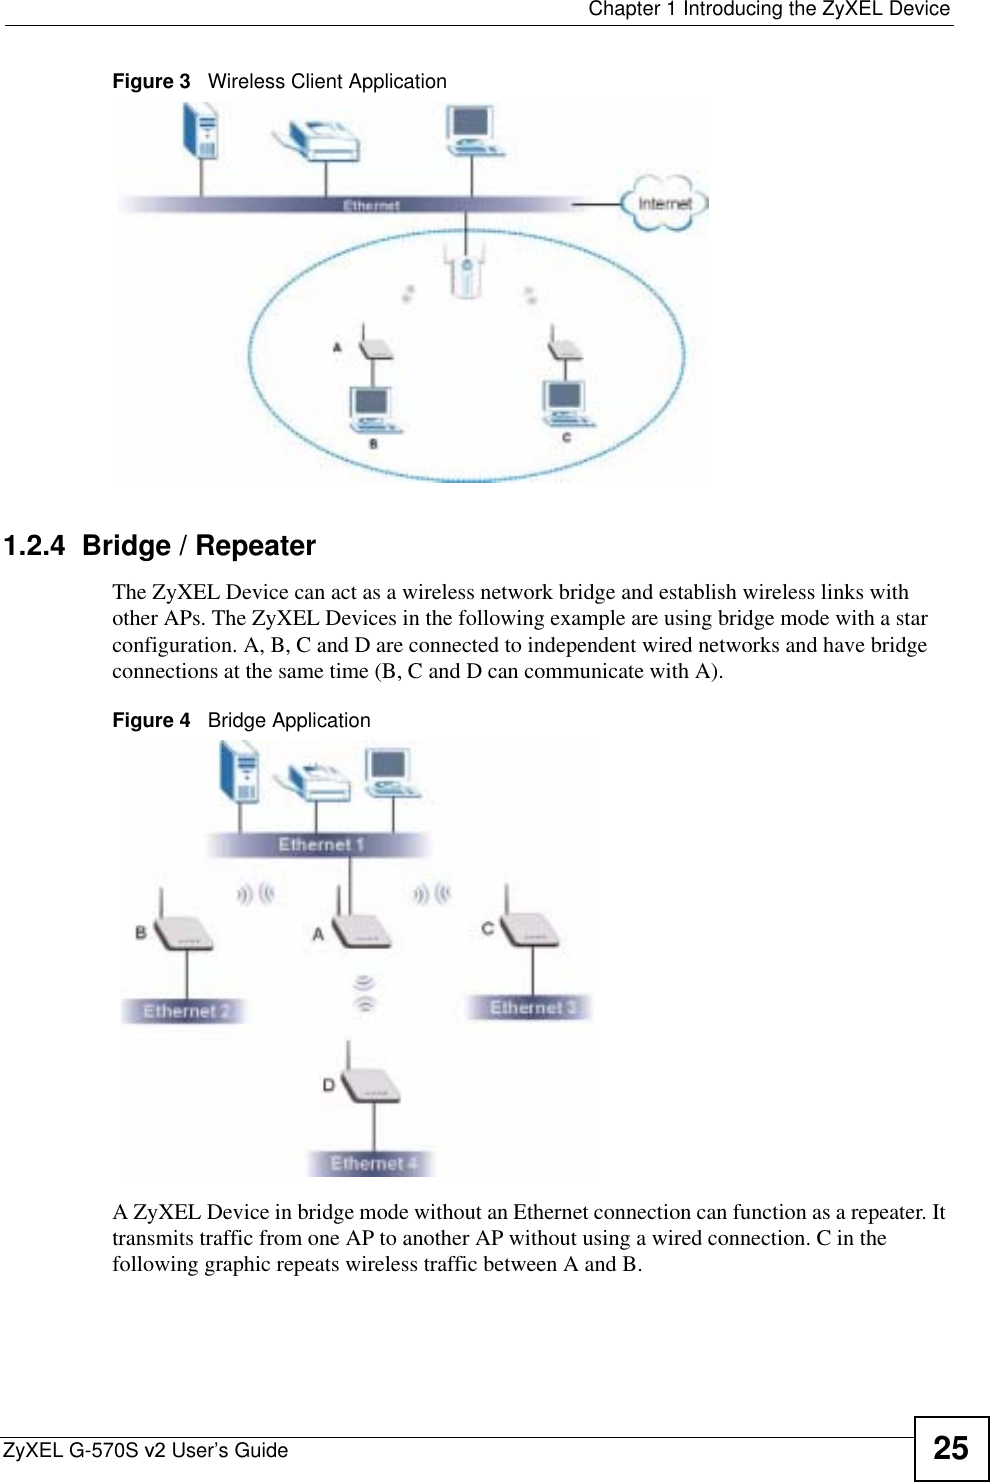  Chapter 1 Introducing the ZyXEL DeviceZyXEL G-570S v2 User’s Guide 25Figure 3   Wireless Client Application 1.2.4  Bridge / RepeaterThe ZyXEL Device can act as a wireless network bridge and establish wireless links with other APs. The ZyXEL Devices in the following example are using bridge mode with a star configuration. A, B, C and D are connected to independent wired networks and have bridge connections at the same time (B, C and D can communicate with A). Figure 4   Bridge ApplicationA ZyXEL Device in bridge mode without an Ethernet connection can function as a repeater. It transmits traffic from one AP to another AP without using a wired connection. C in the following graphic repeats wireless traffic between A and B.